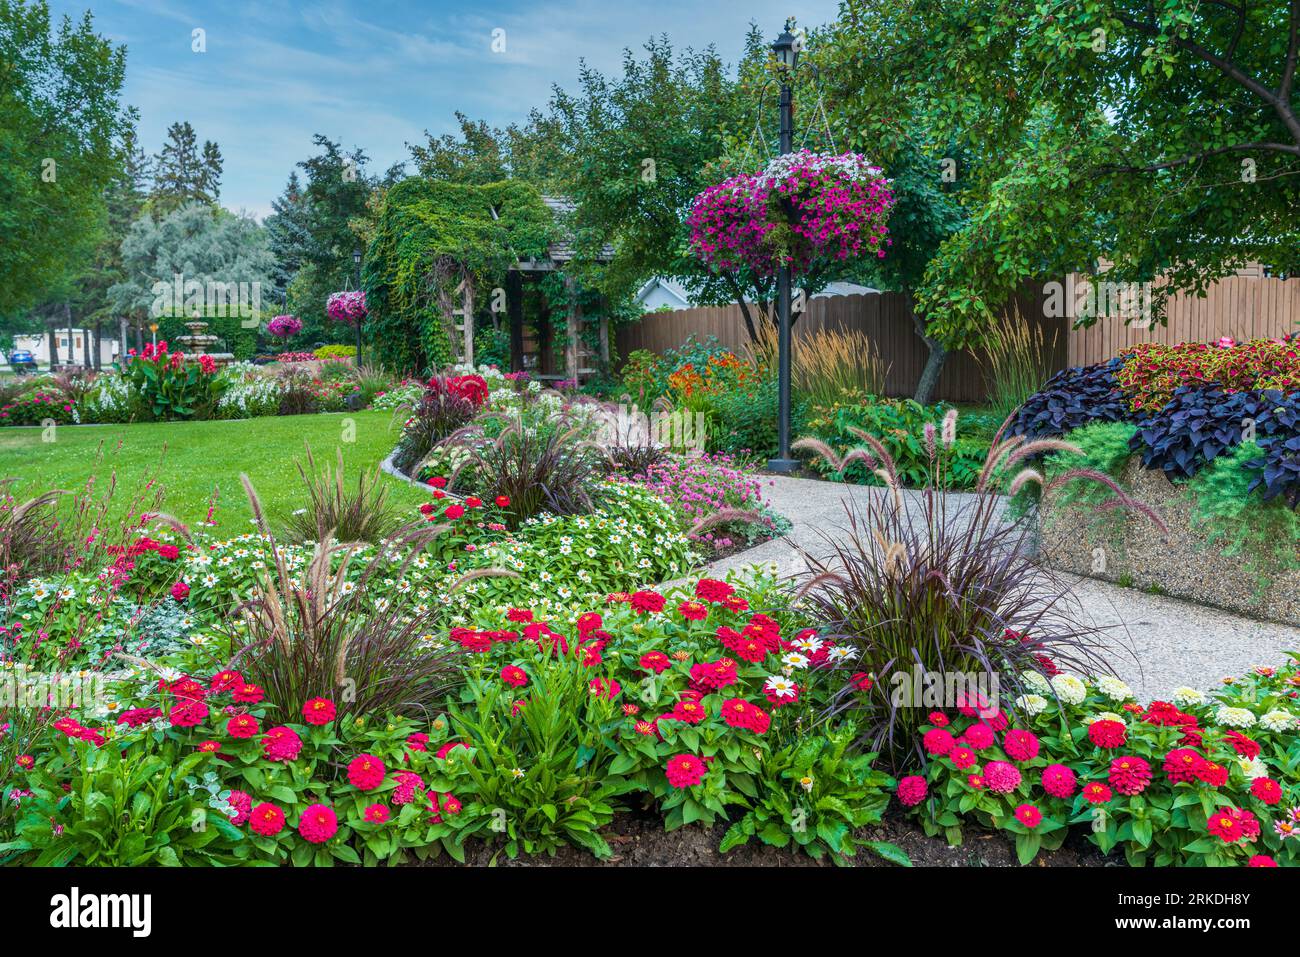 The flower display at the Parkview Gardens, Winkler, Manitoba, Canada. Stock Photo